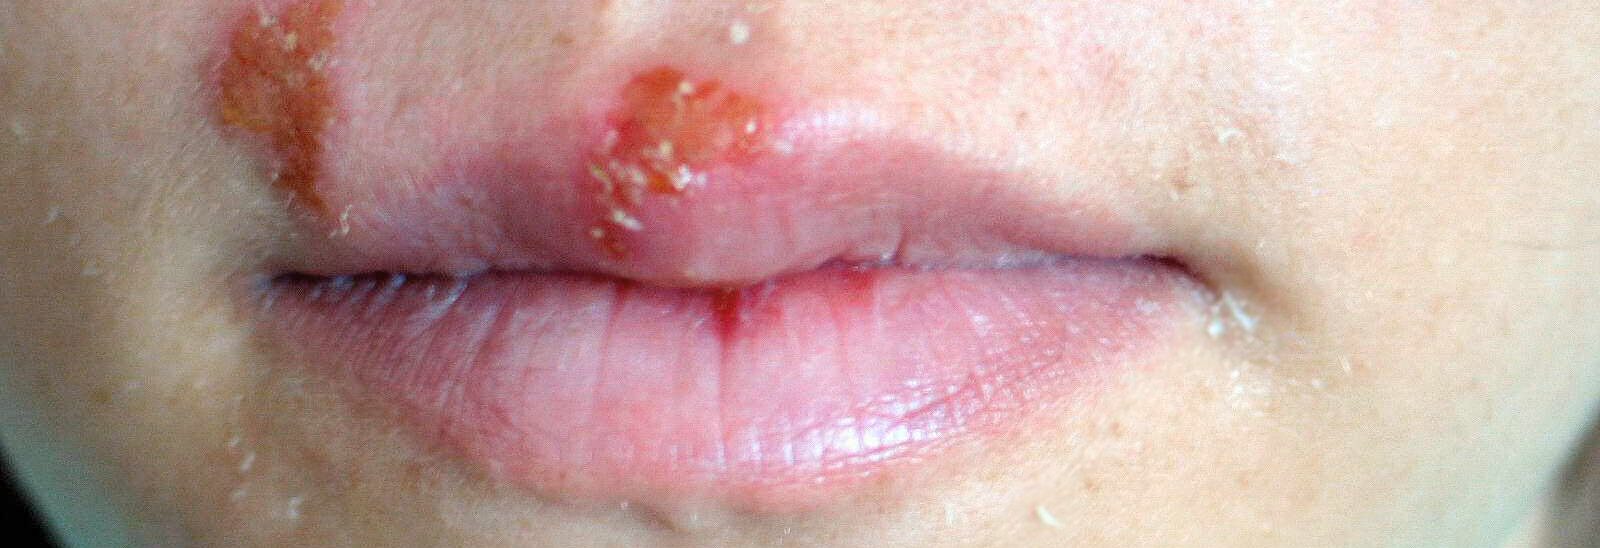 The Causes Of Cold Sores And How To Treat The Symptoms Your Skin